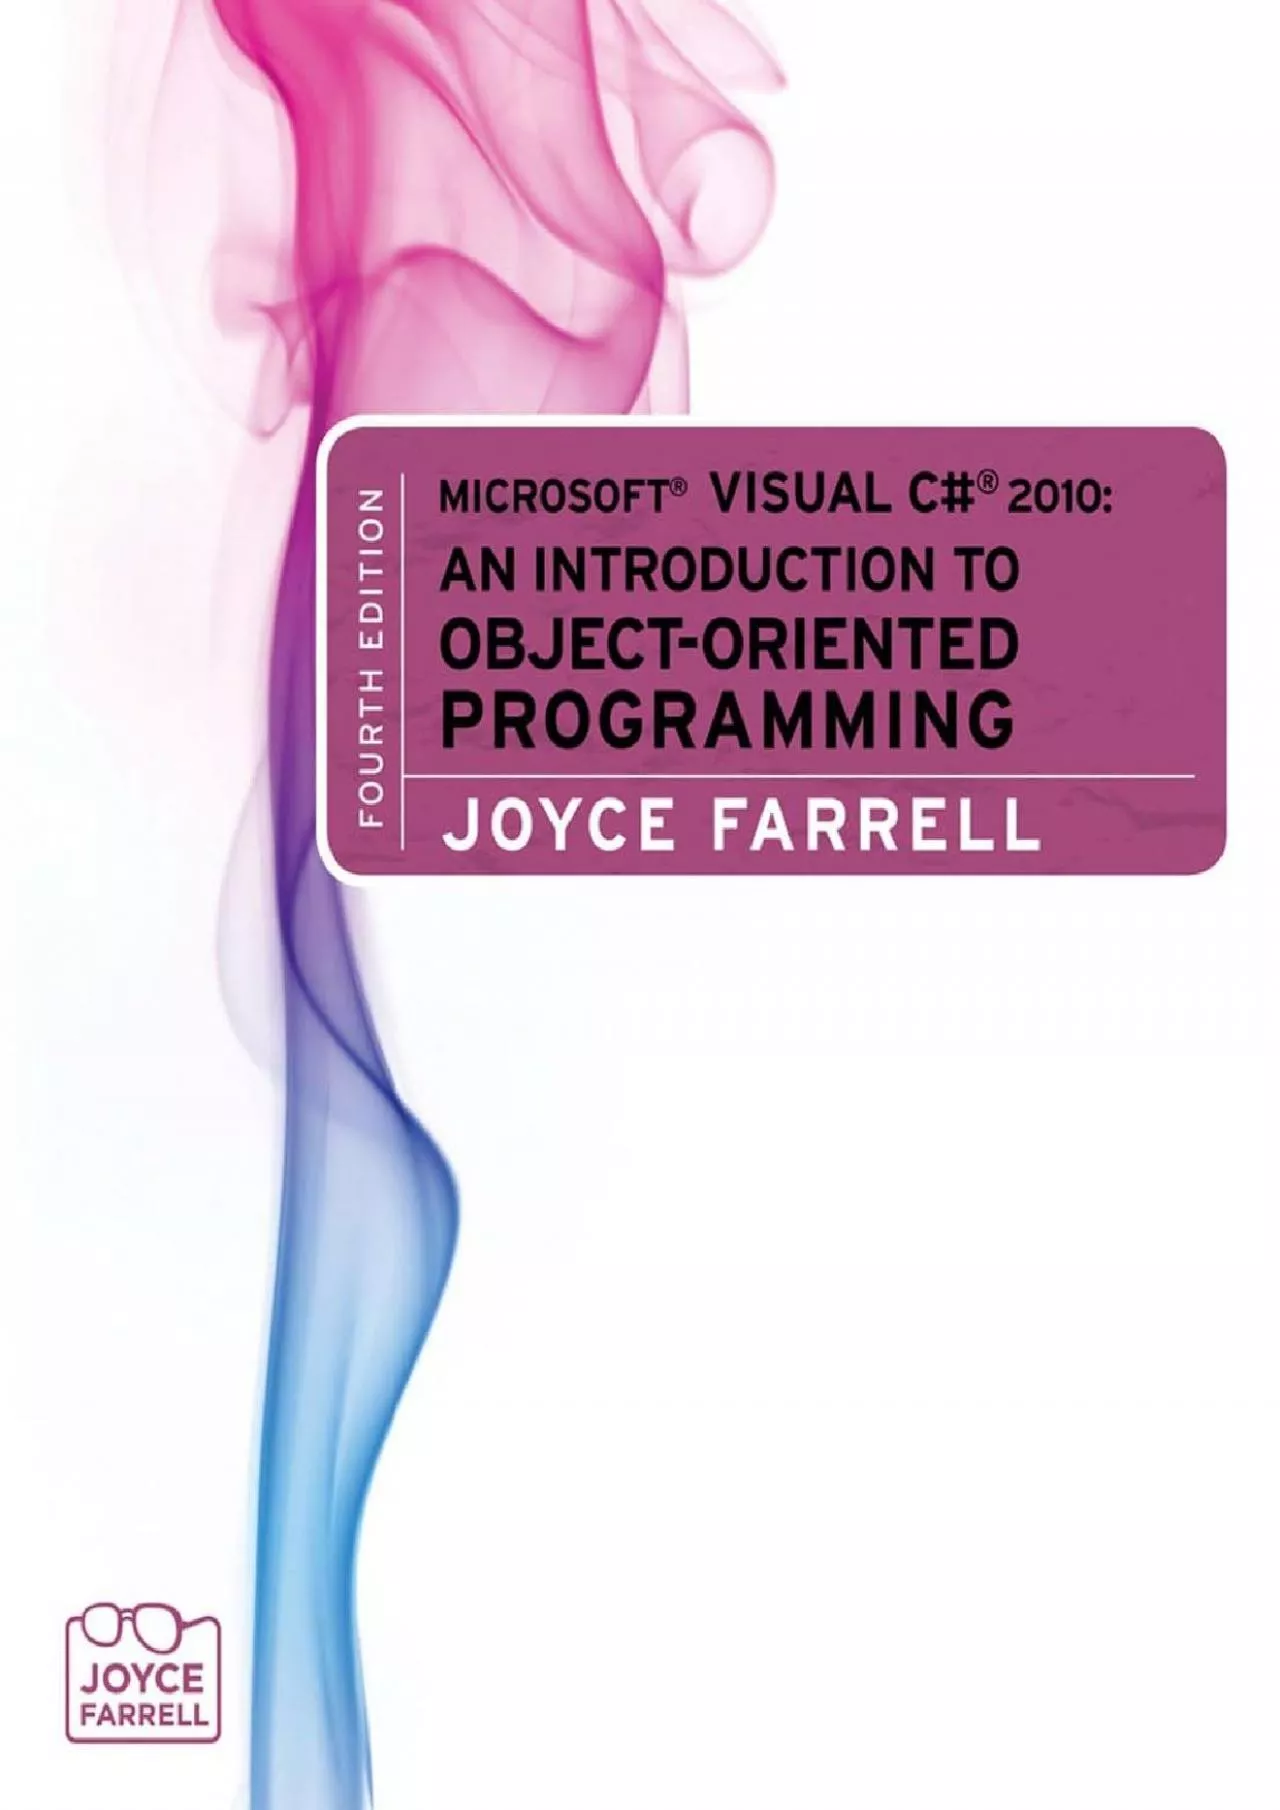 [PDF]-Microsoft Visual C 2010: An Introduction to Object-Oriented Programming (Introduction